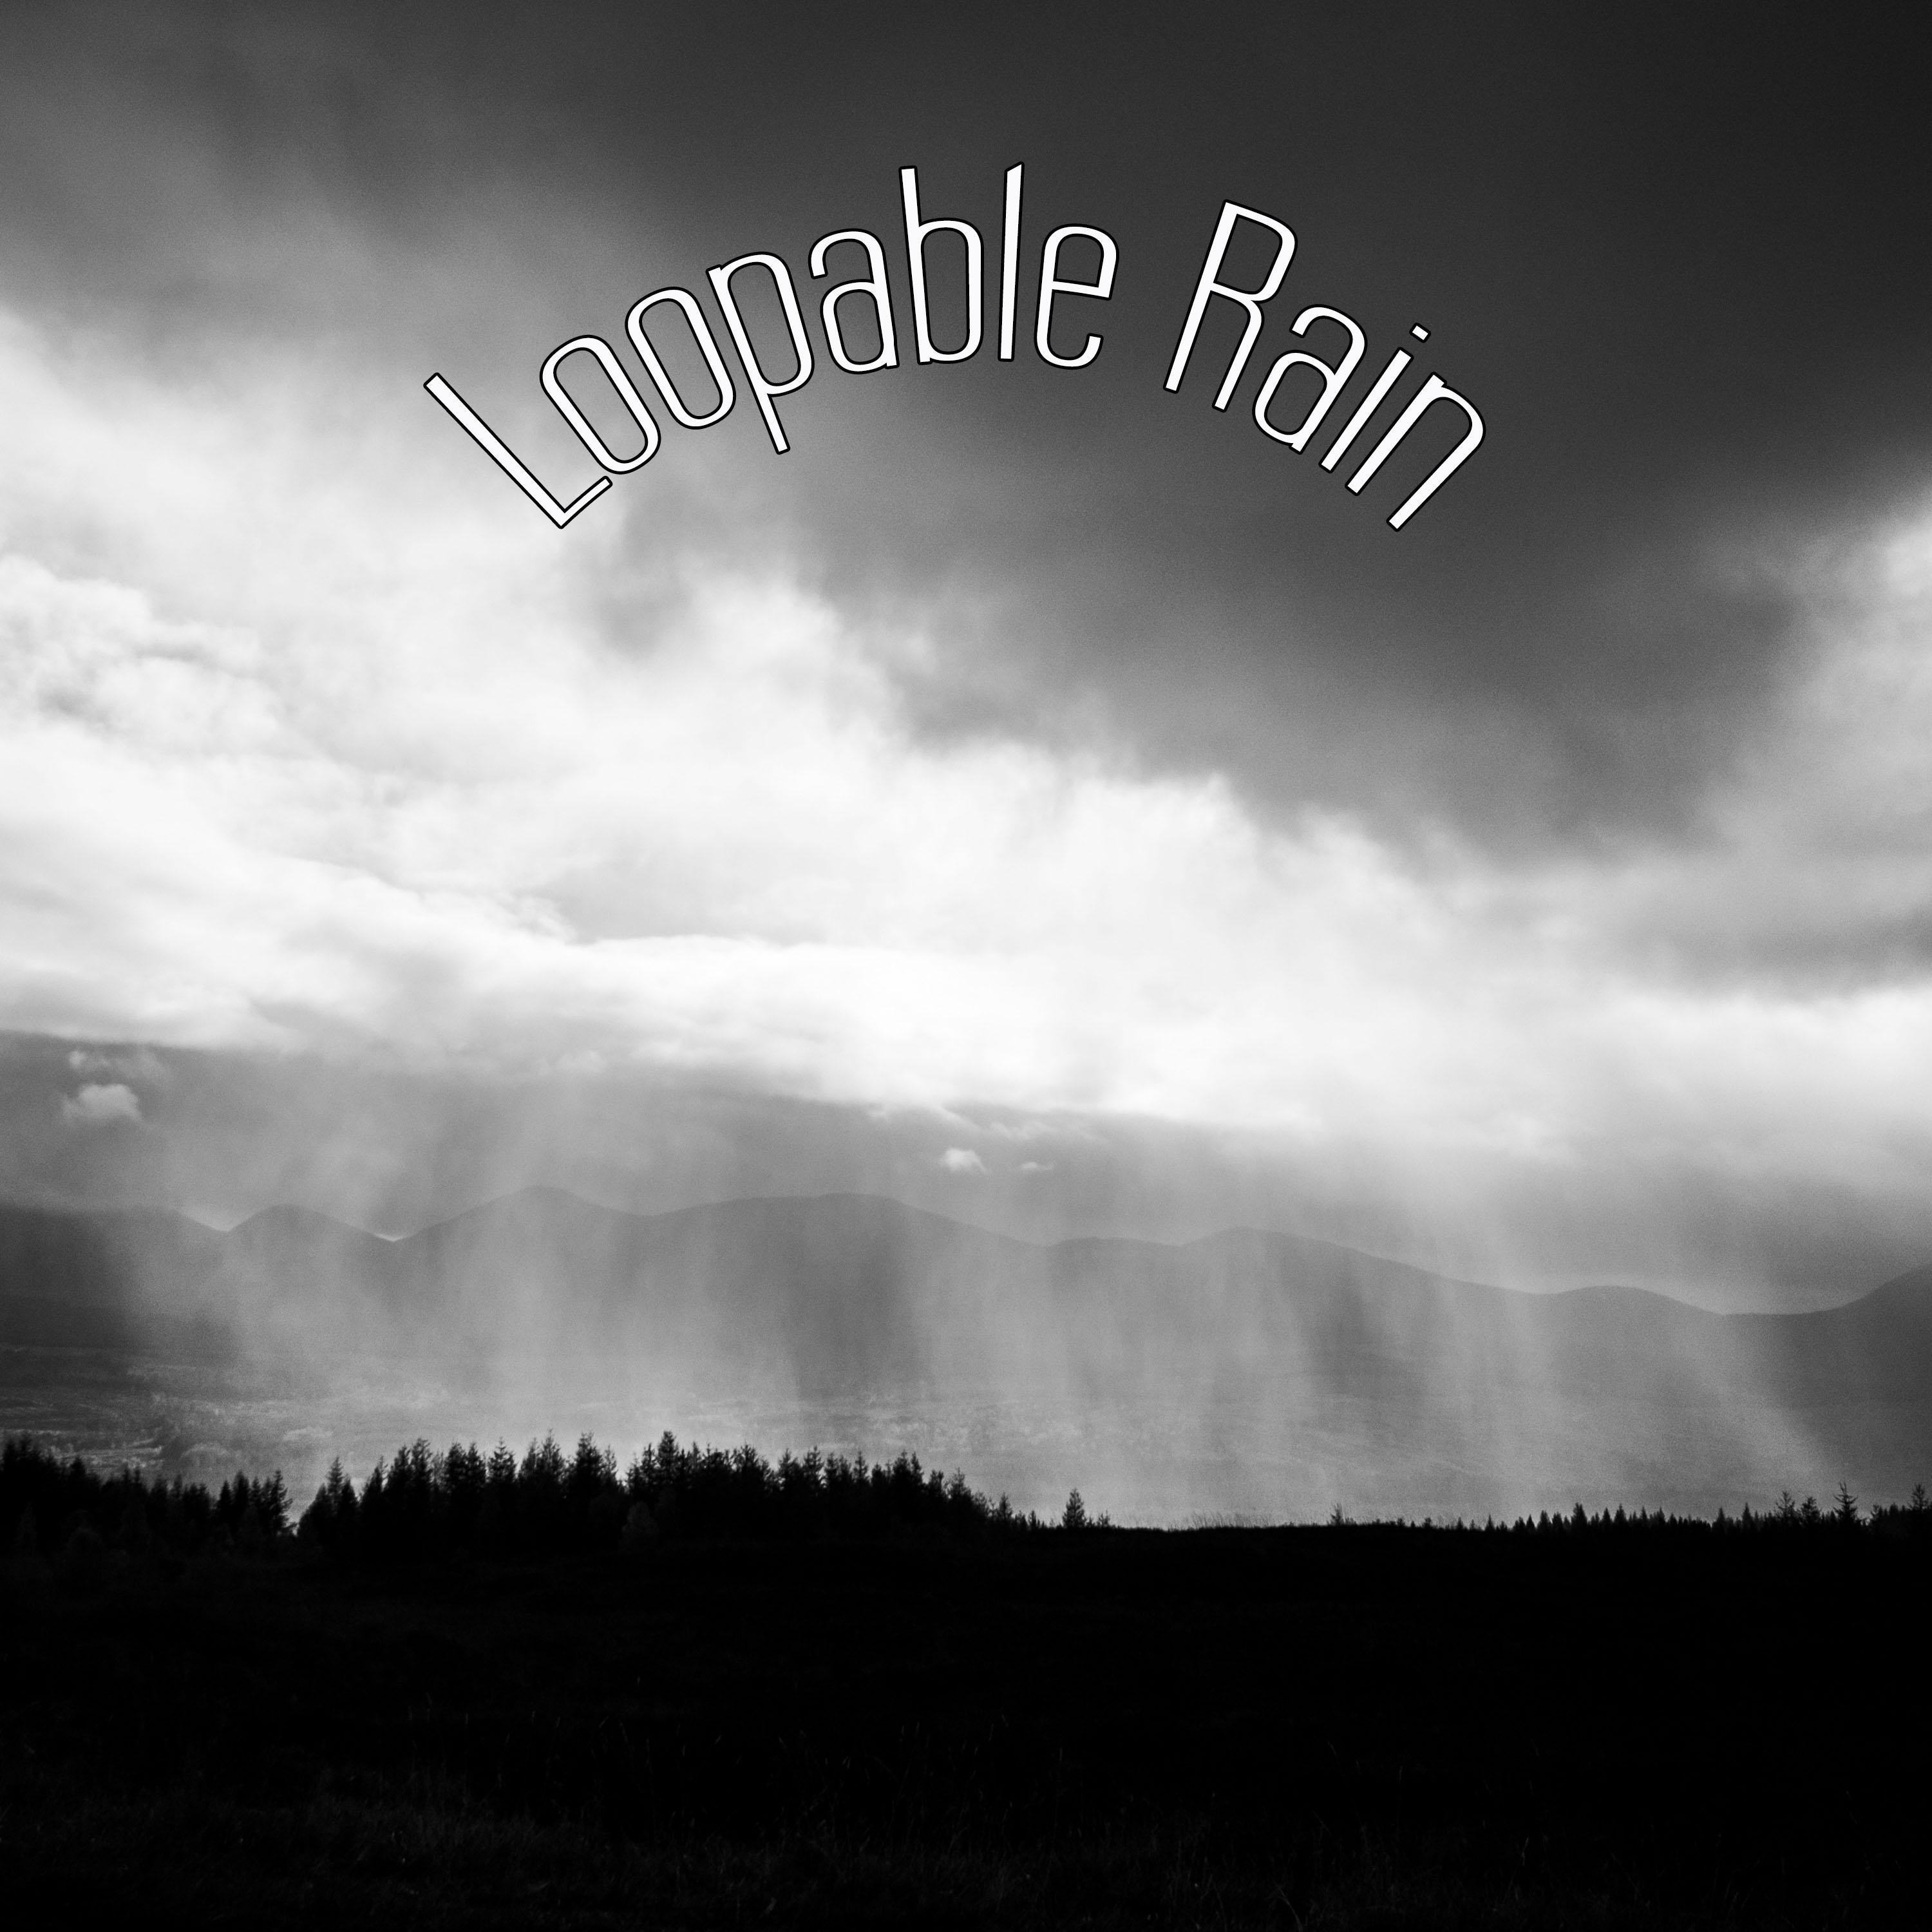 19 Loopable Rain and Meditation Sounds. Nature Sounds for Deep Sleep and Relaxation